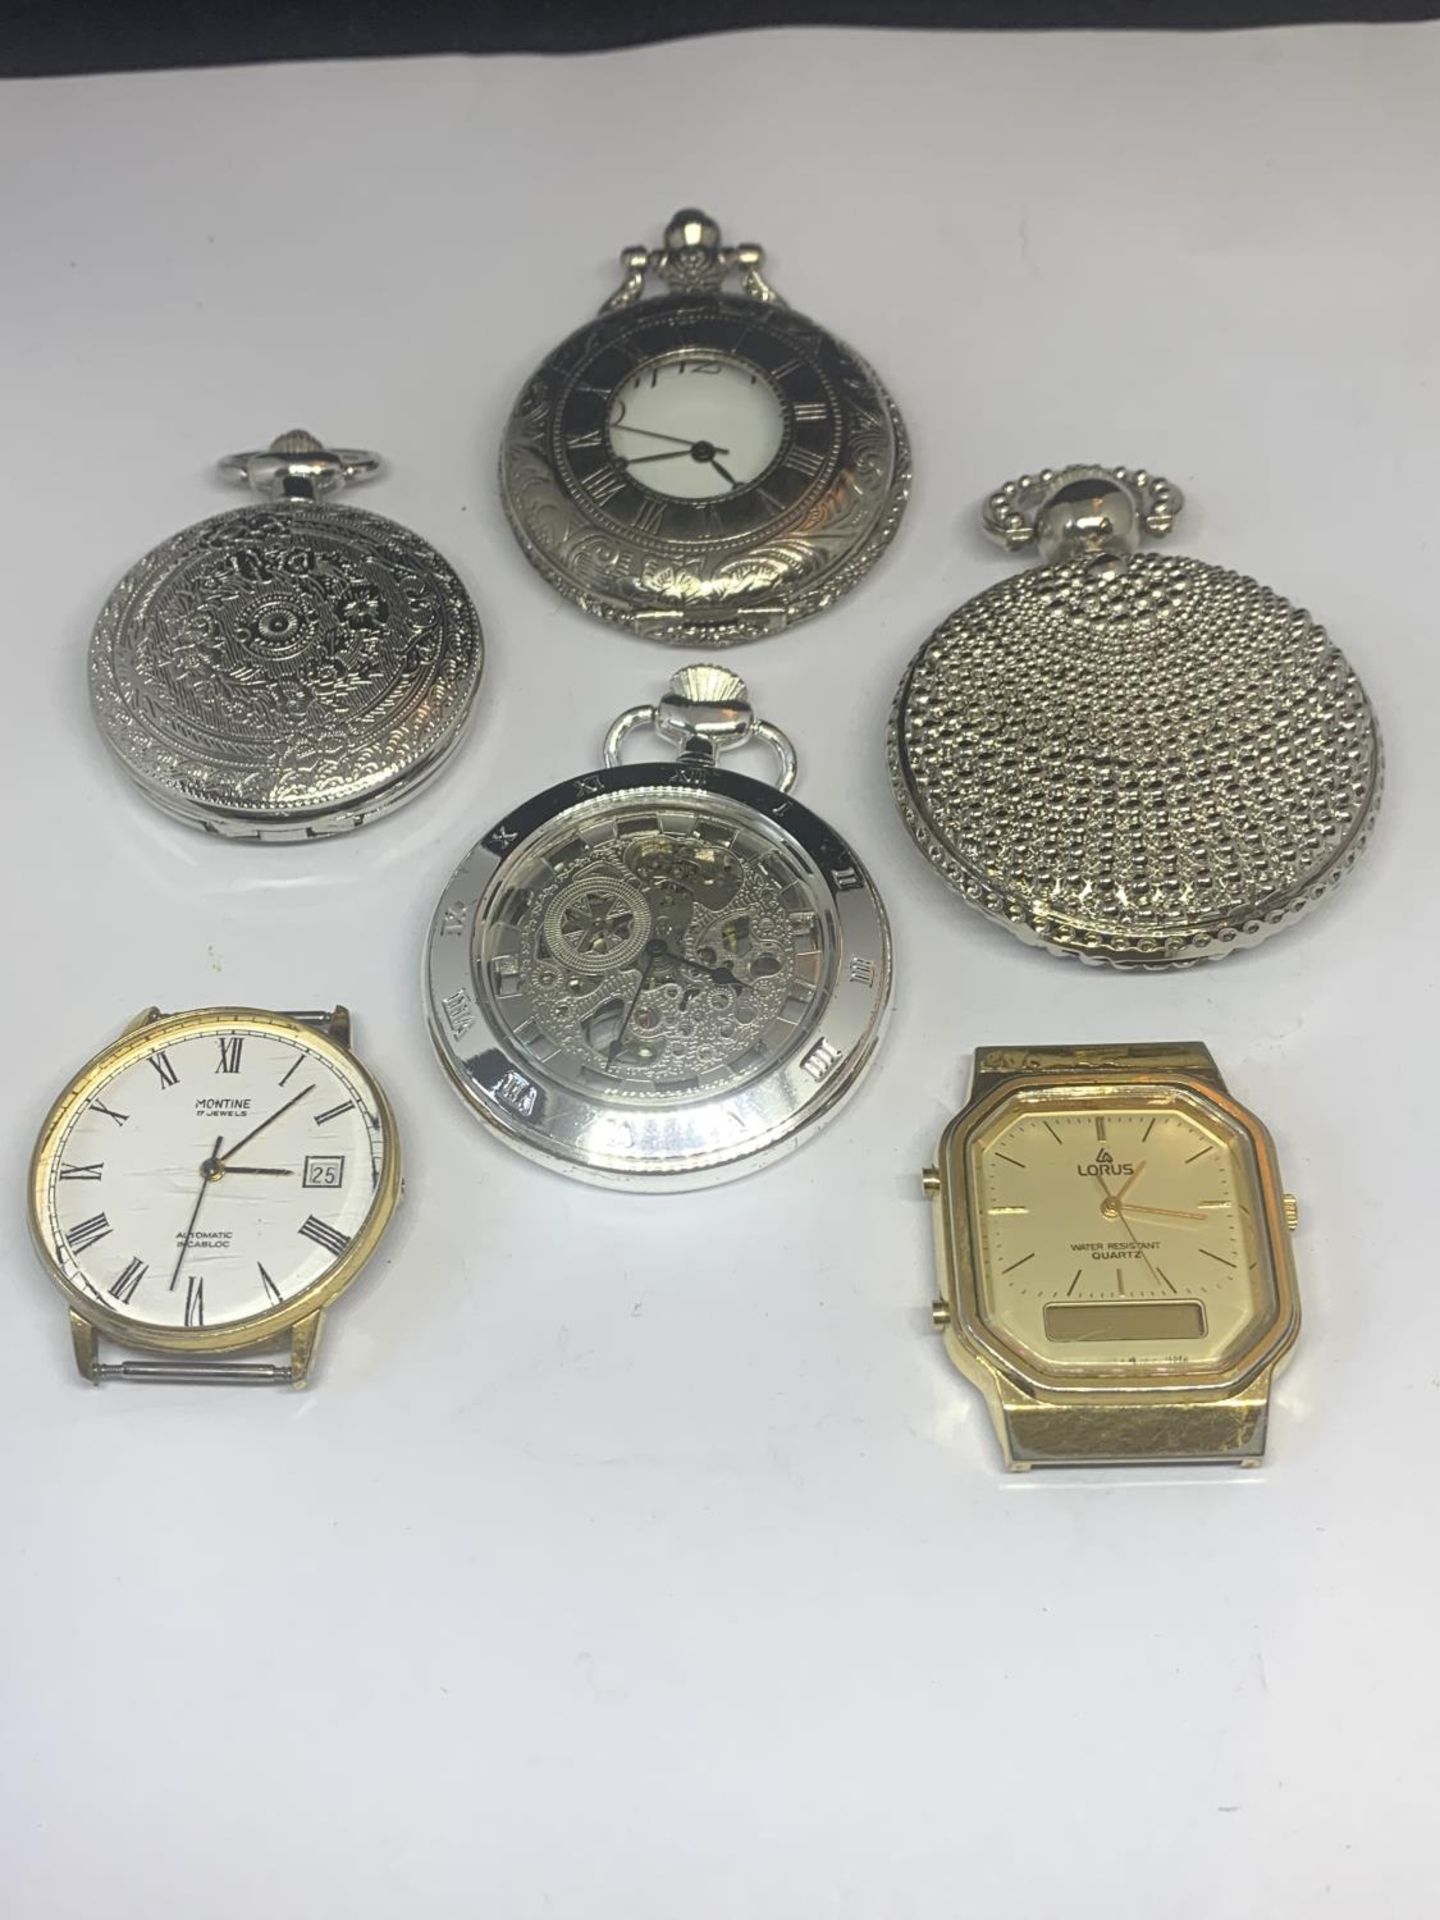 SIX VARIOUS WATCHES TO INCLUDE FOUR WHITE METAL POCKET WATCHES AND TWO WRIST WATCHES WITHOUT STRAPS